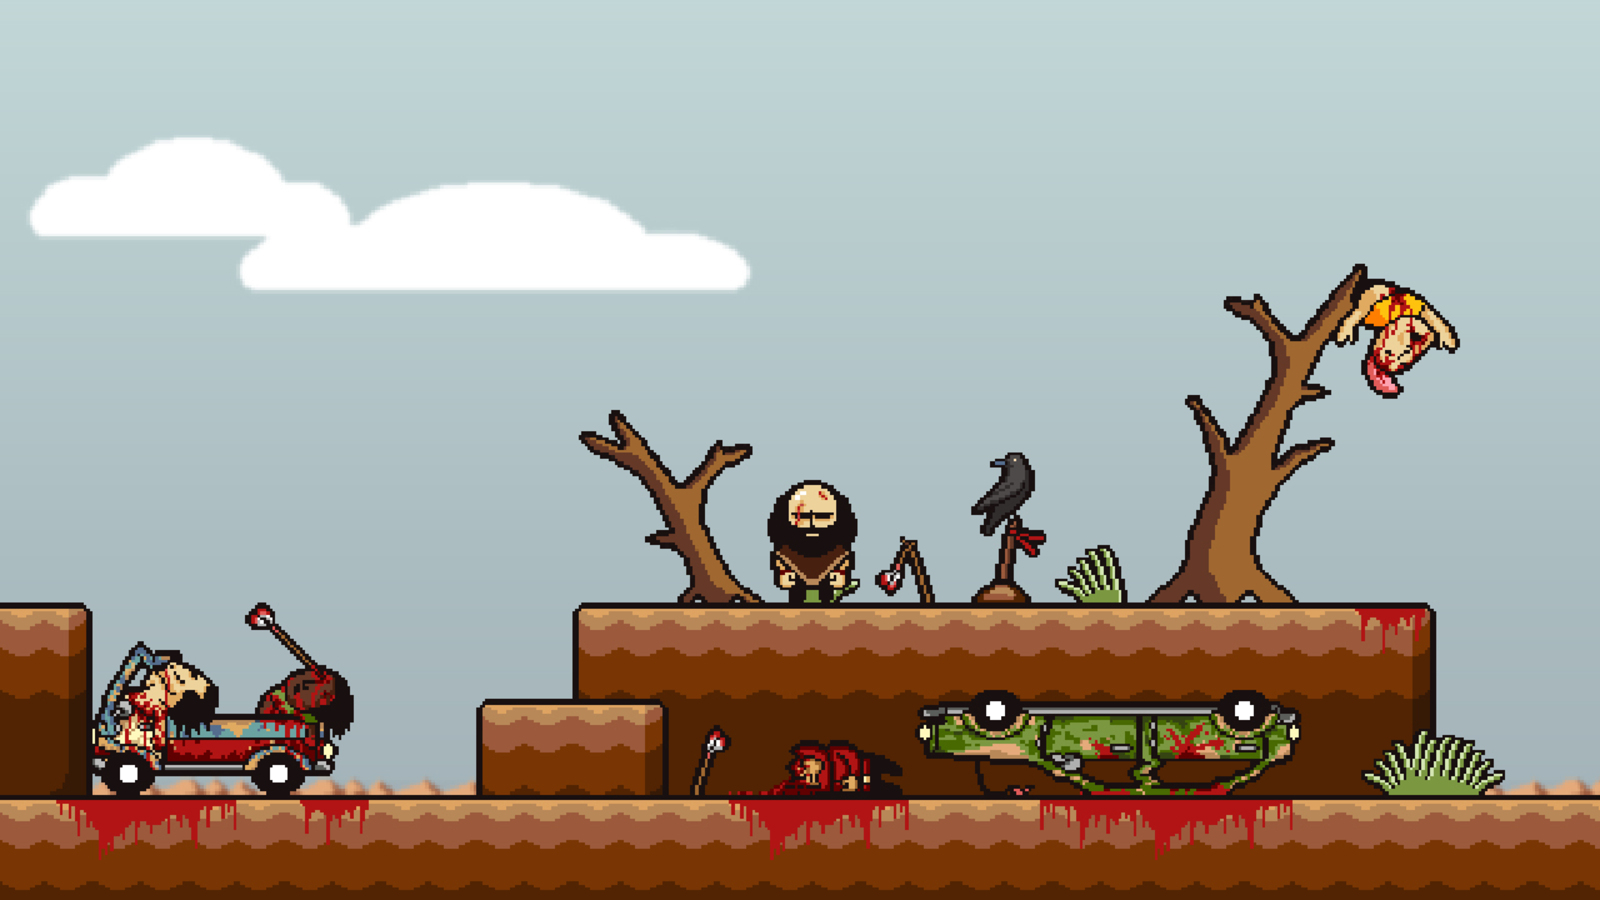 Have you played lisa the painful rock paper shotgun